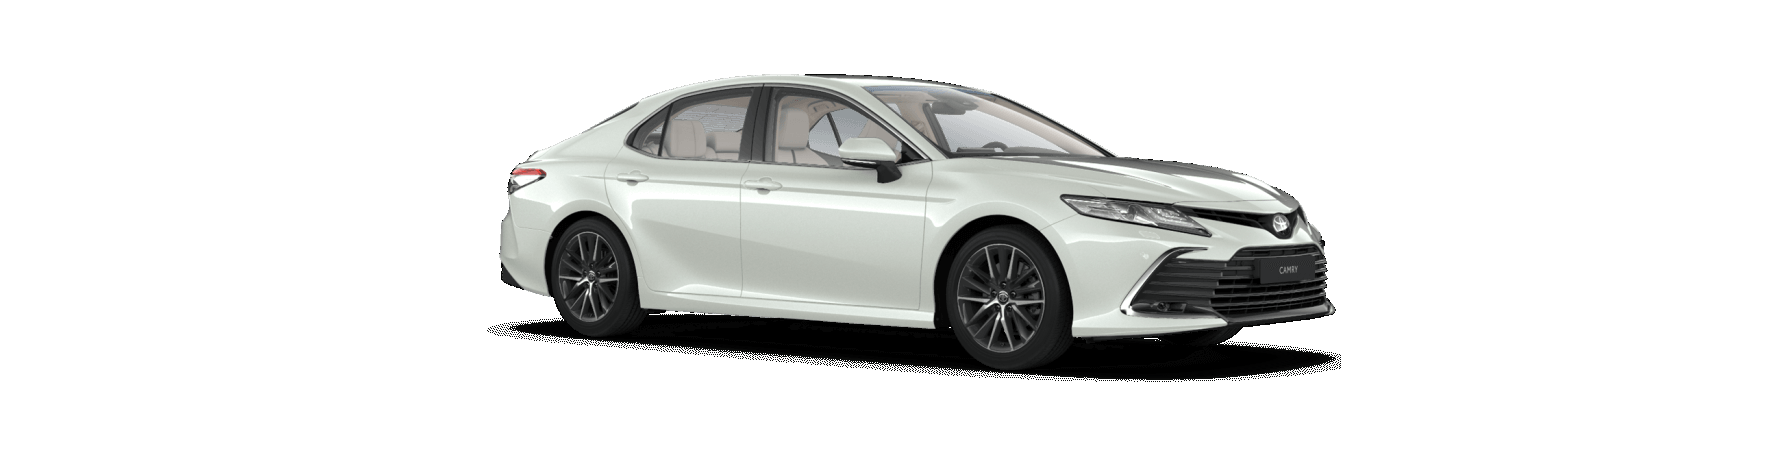 camry_conventional_1780x466